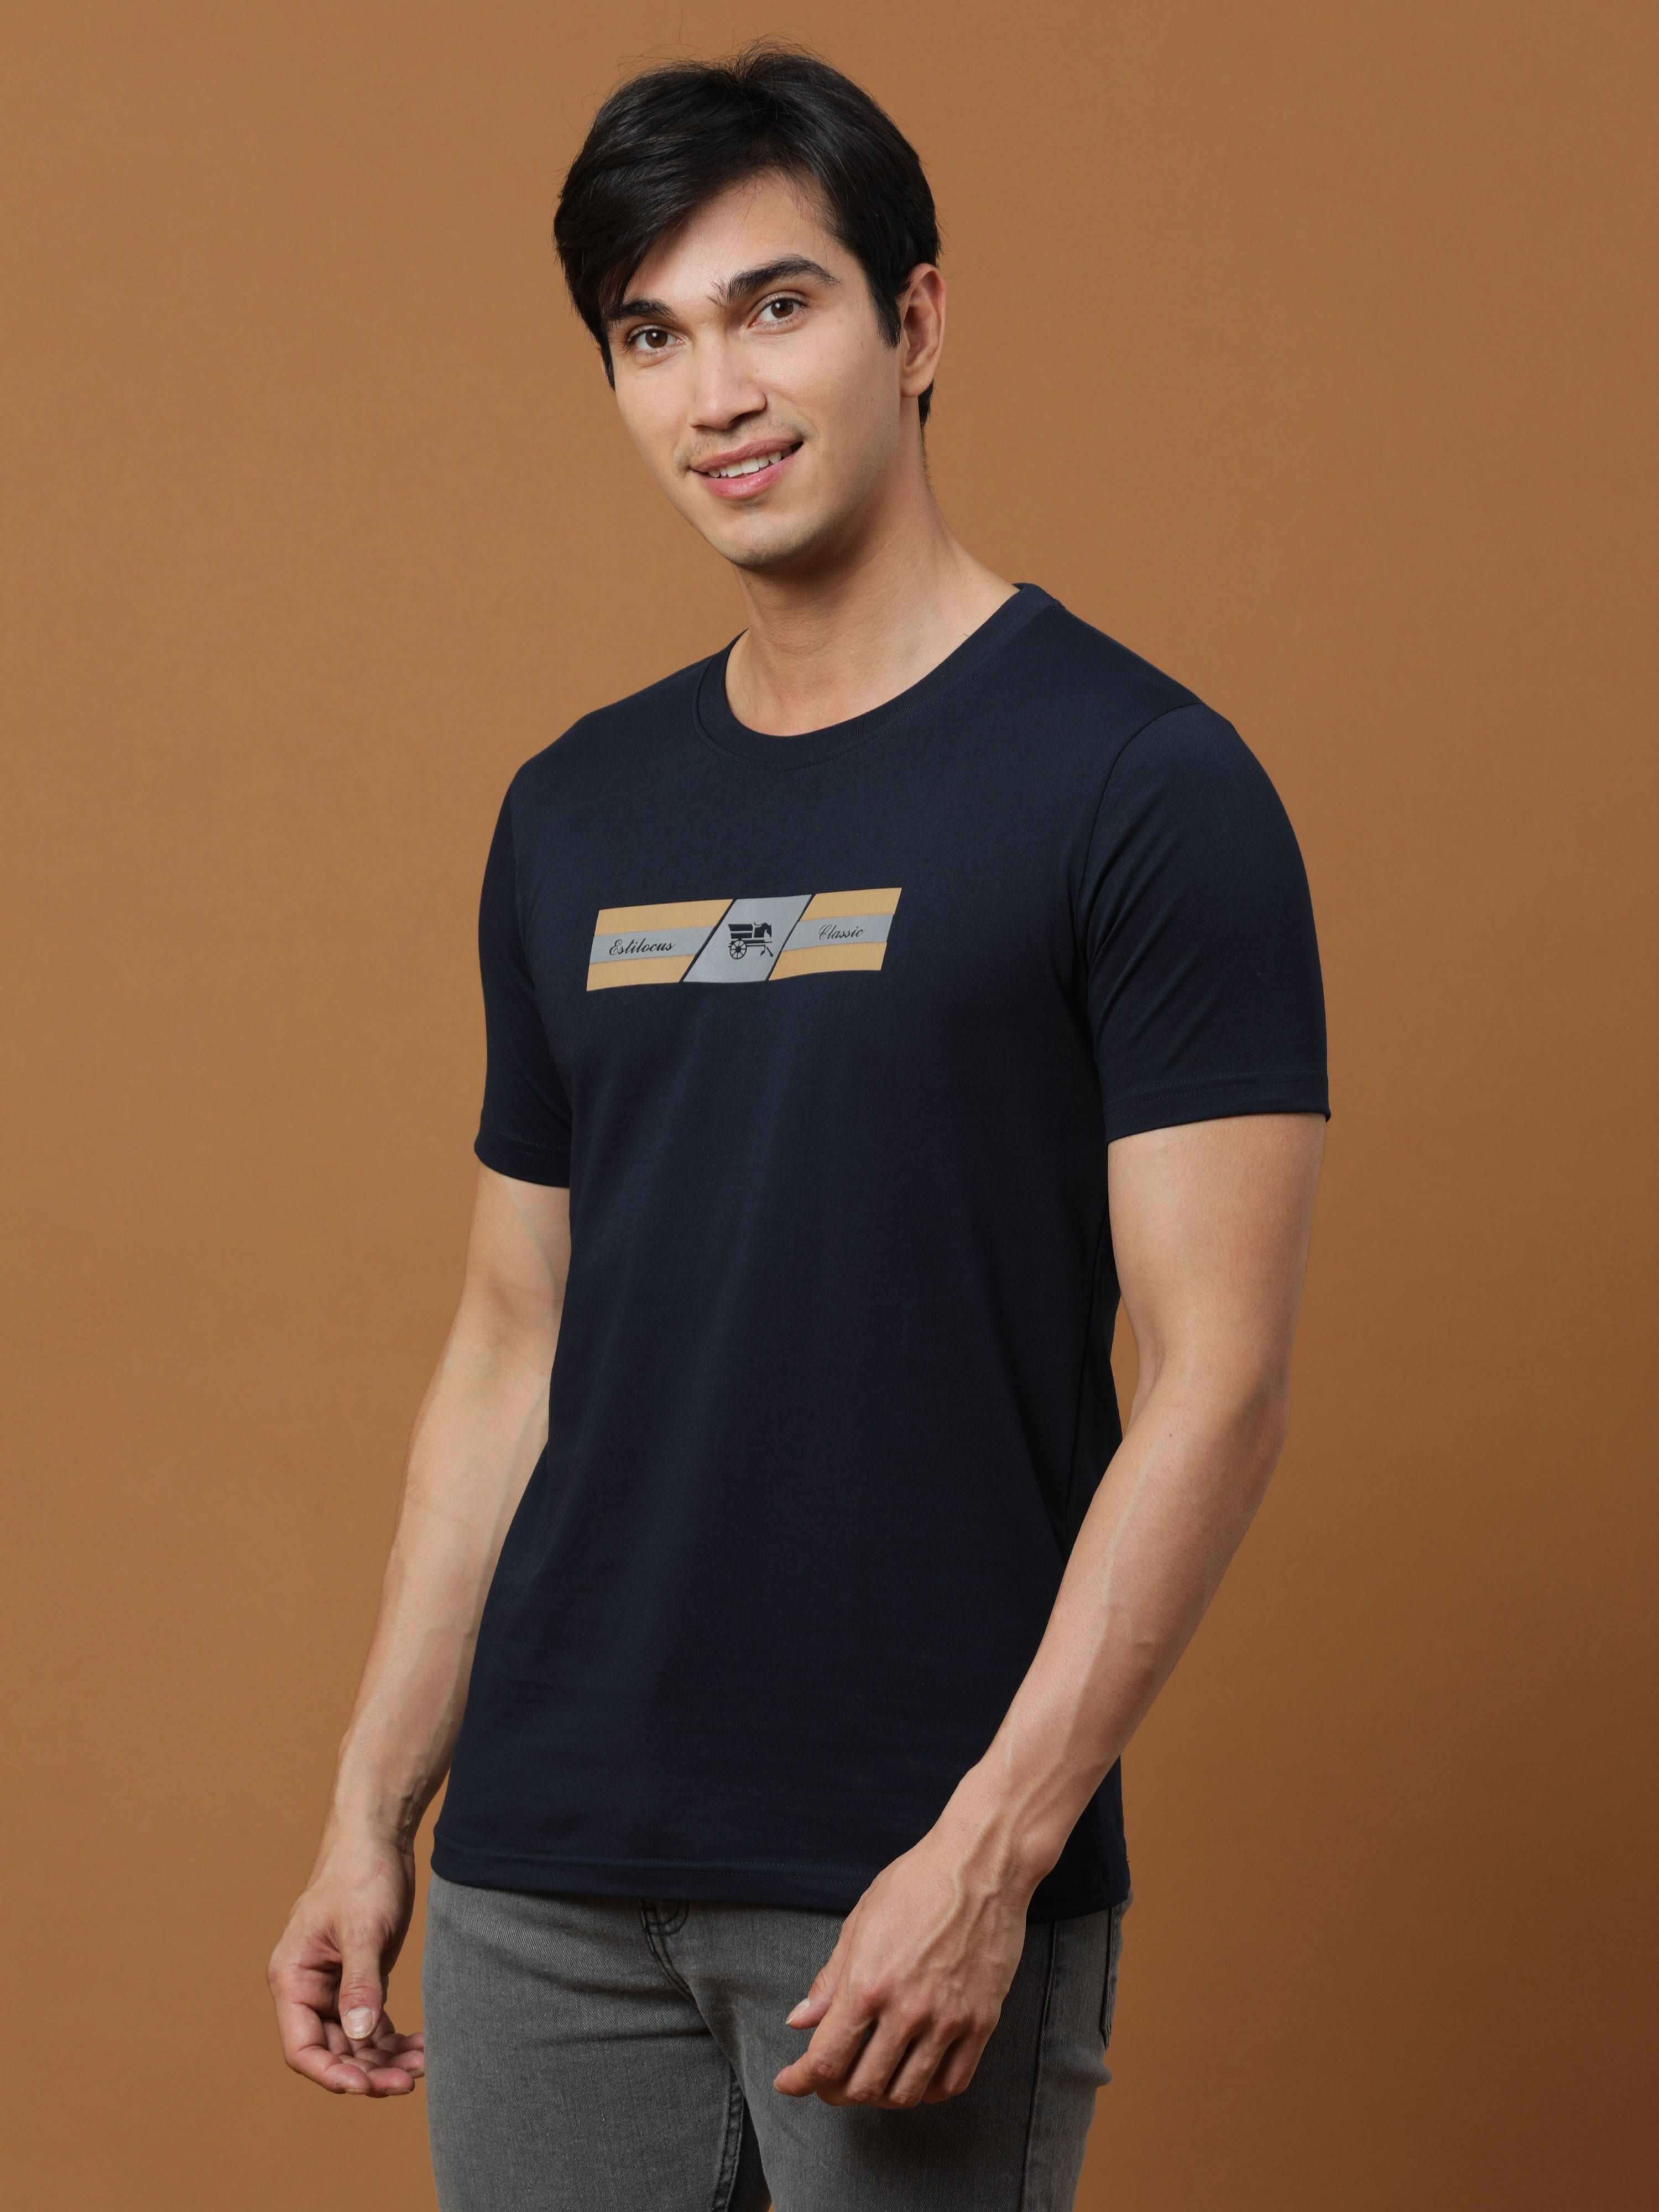 Black Classic Hd Printed T Shirt shop online at Estilocus. 100% Cotton Designed and printed on knitted fabric. The fabric is stretchy and lightweight, with a soft skin feel and no wrinkles. Crew neck collar which is smooth on the neck and keeps you comfor